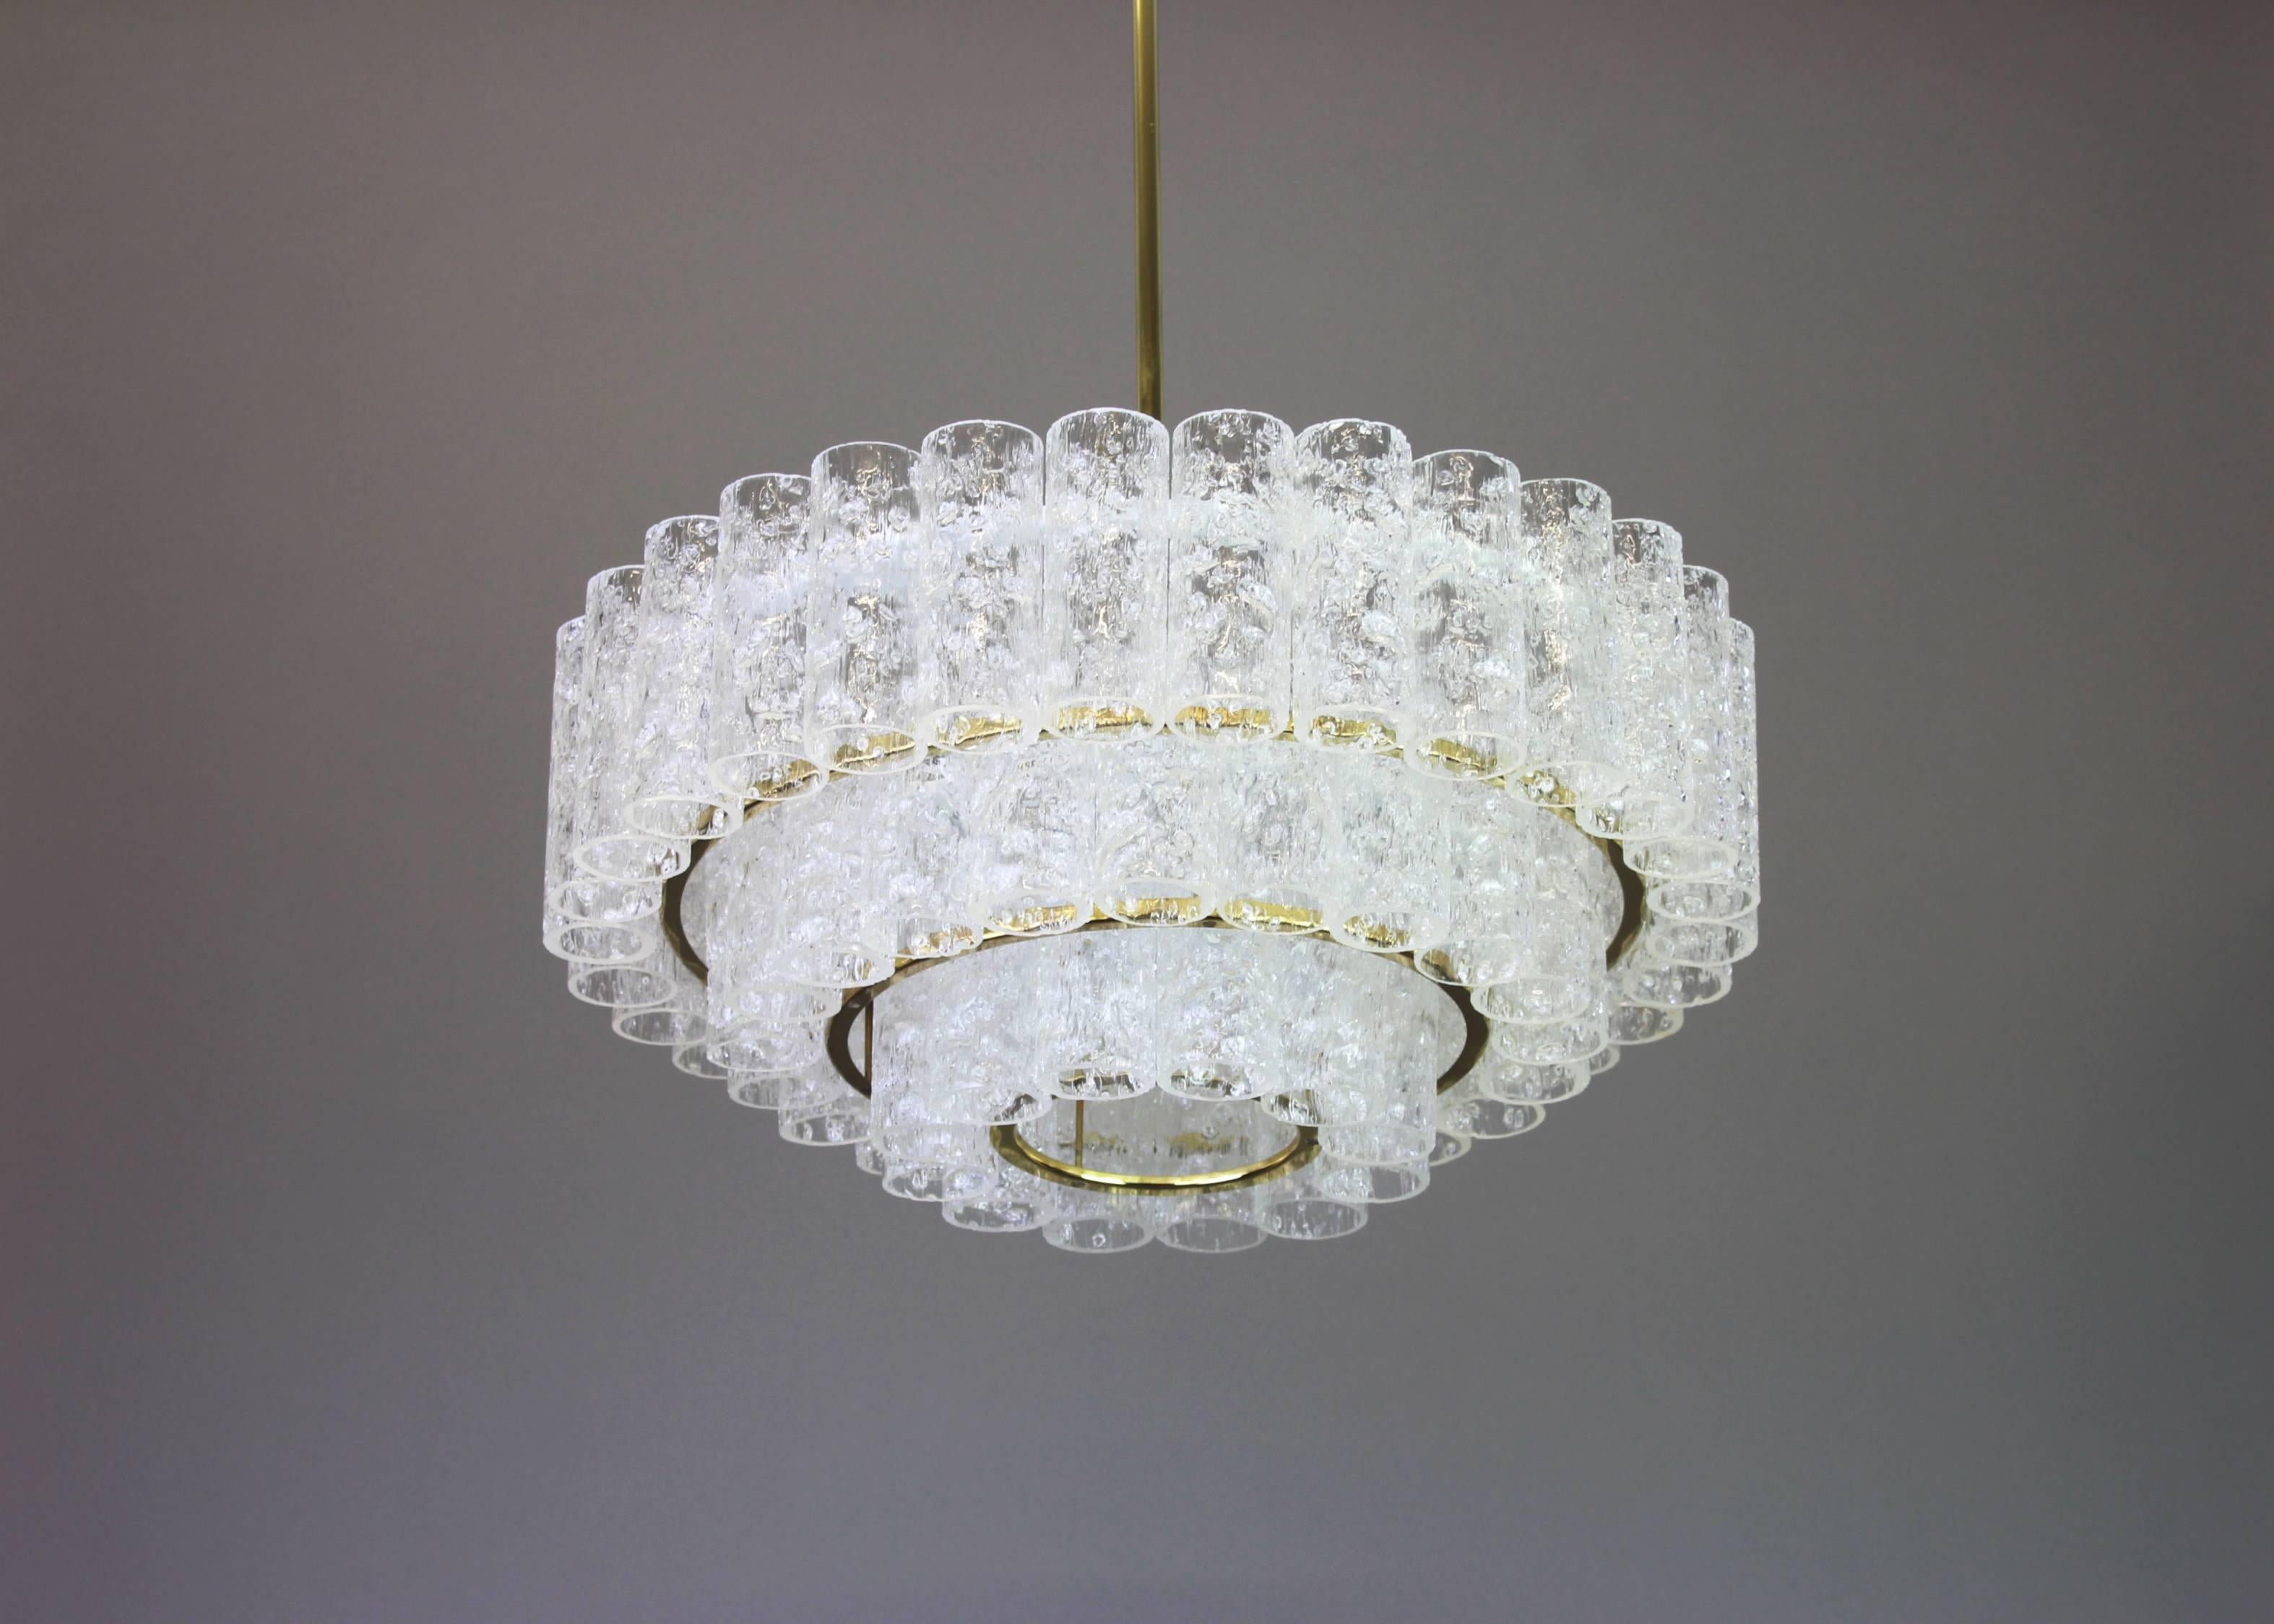 1 of 2 Stunning Murano Ice Glass Tubes Chandelier by Doria, Germany, 1960s For Sale 3